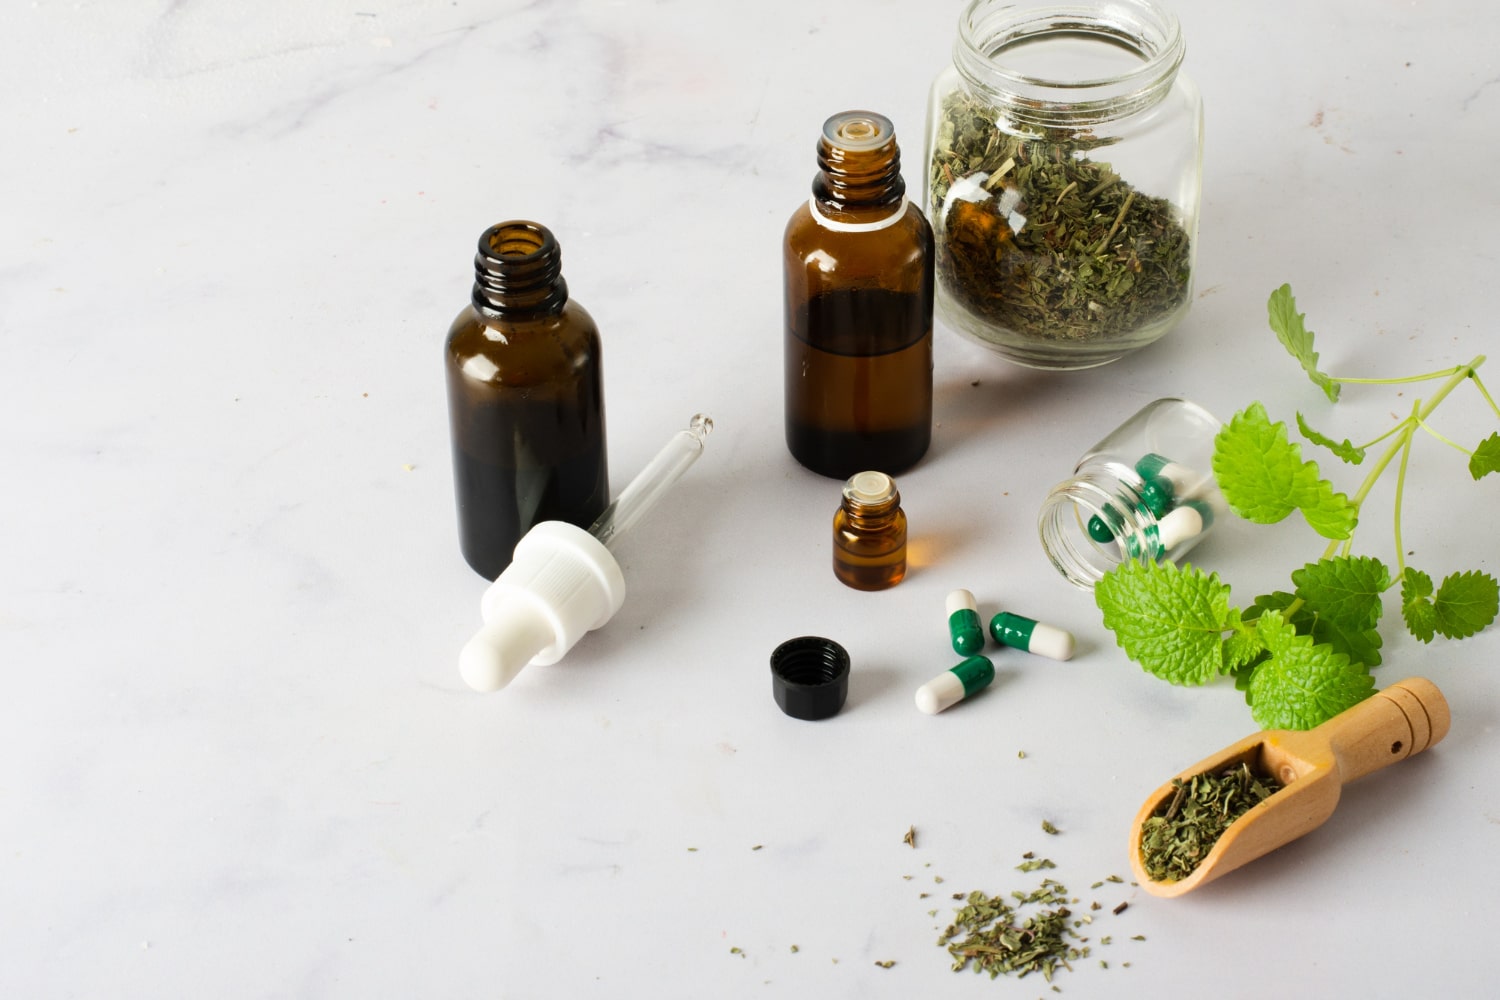 Exploring the potent world of herbal extracts